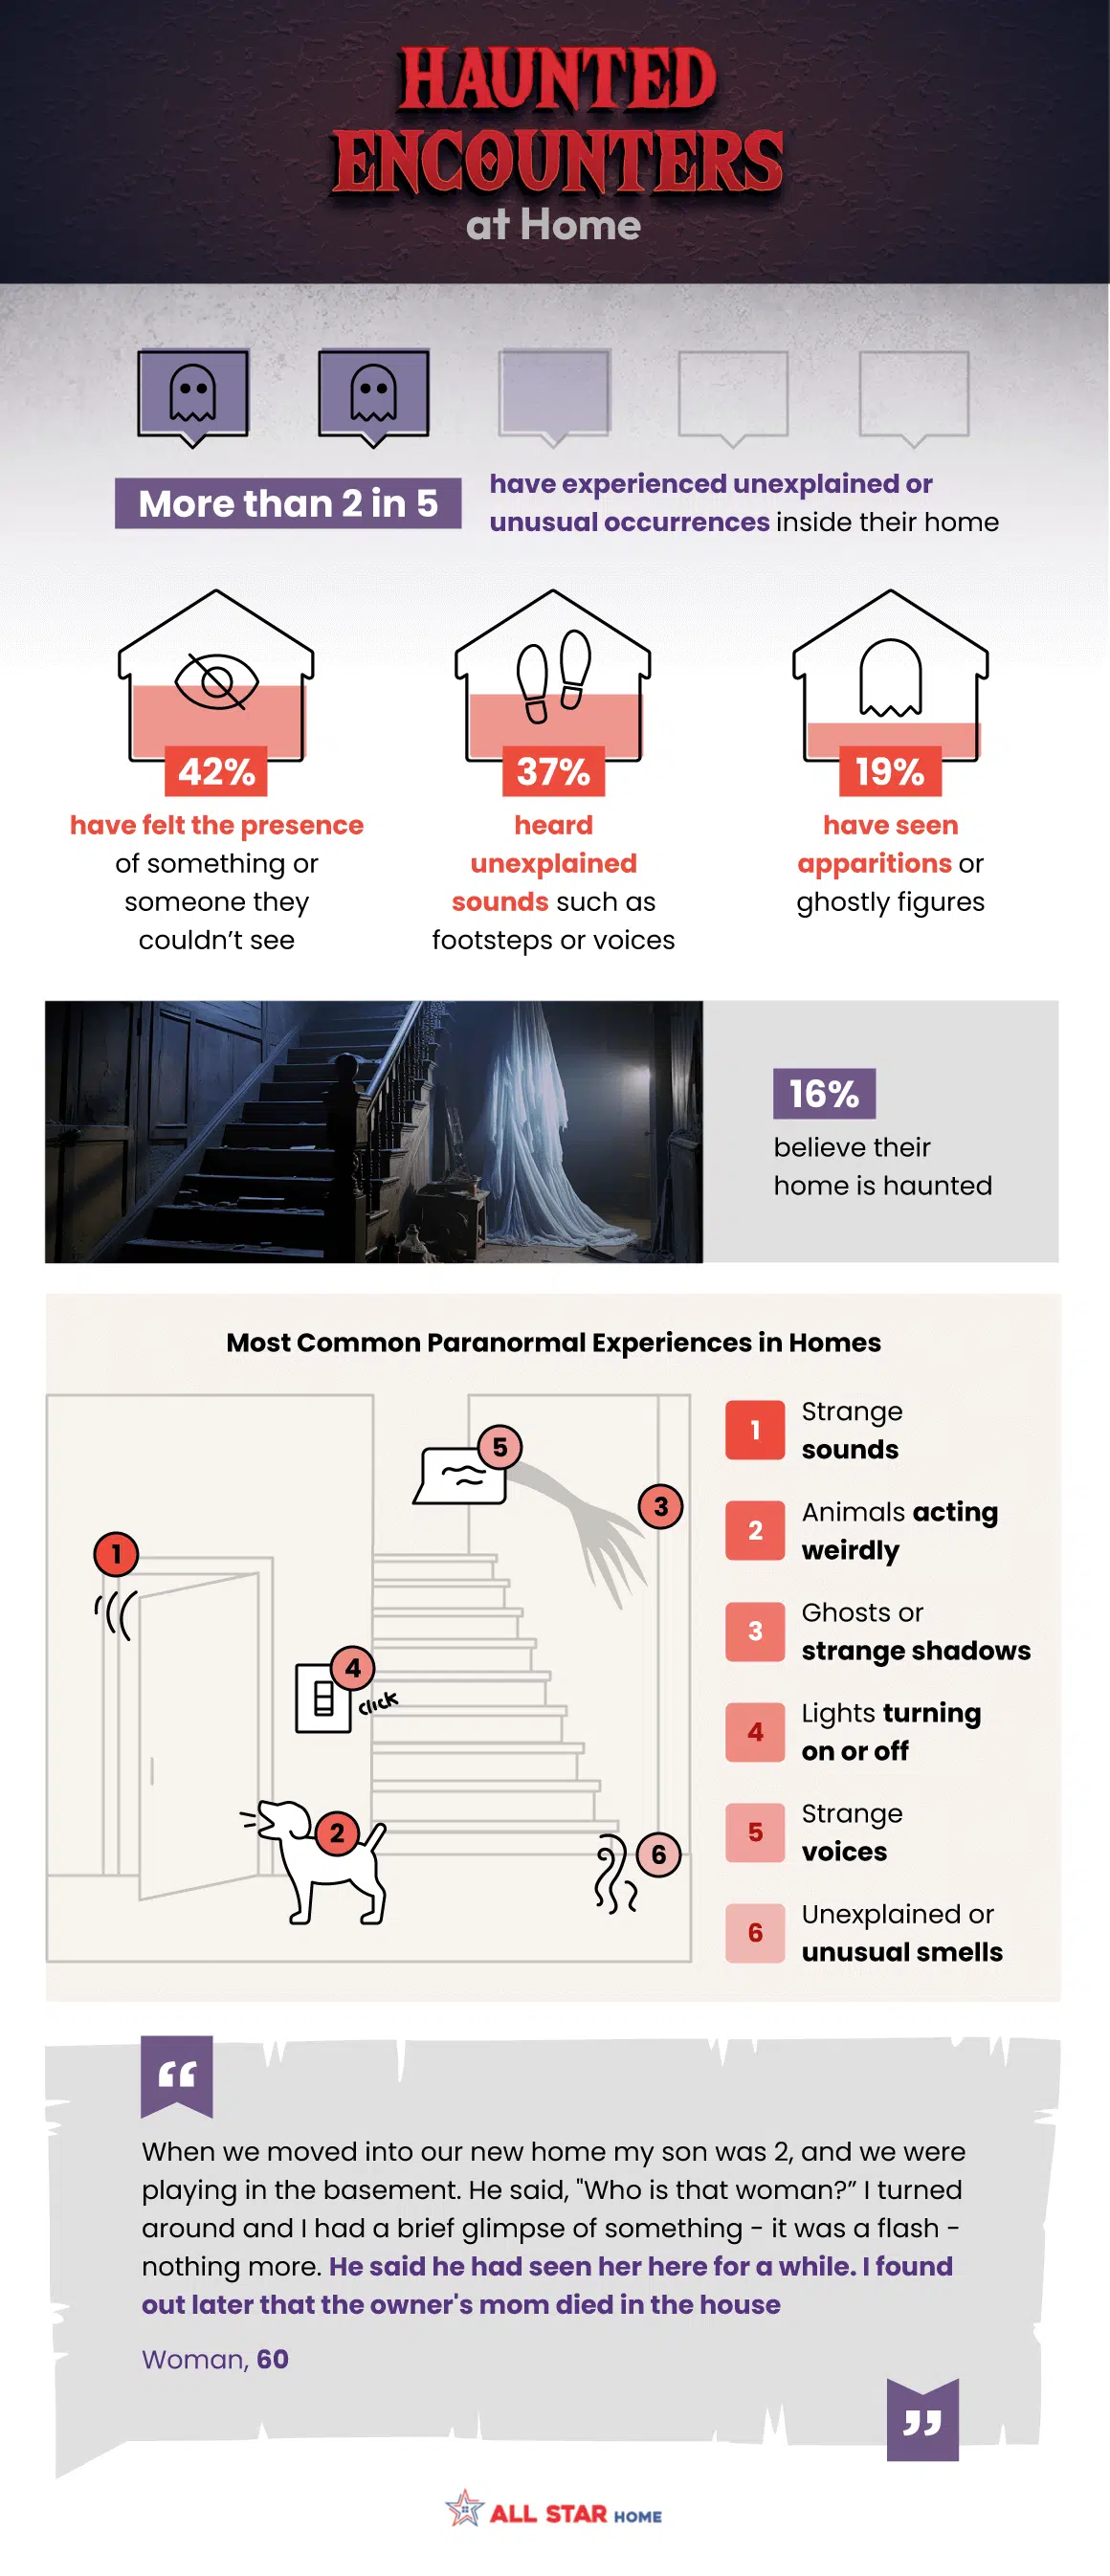 Haunted Encounters at home infographic. More than 2 in 5 have experienced unexplained or unusual occurrences inside their home.